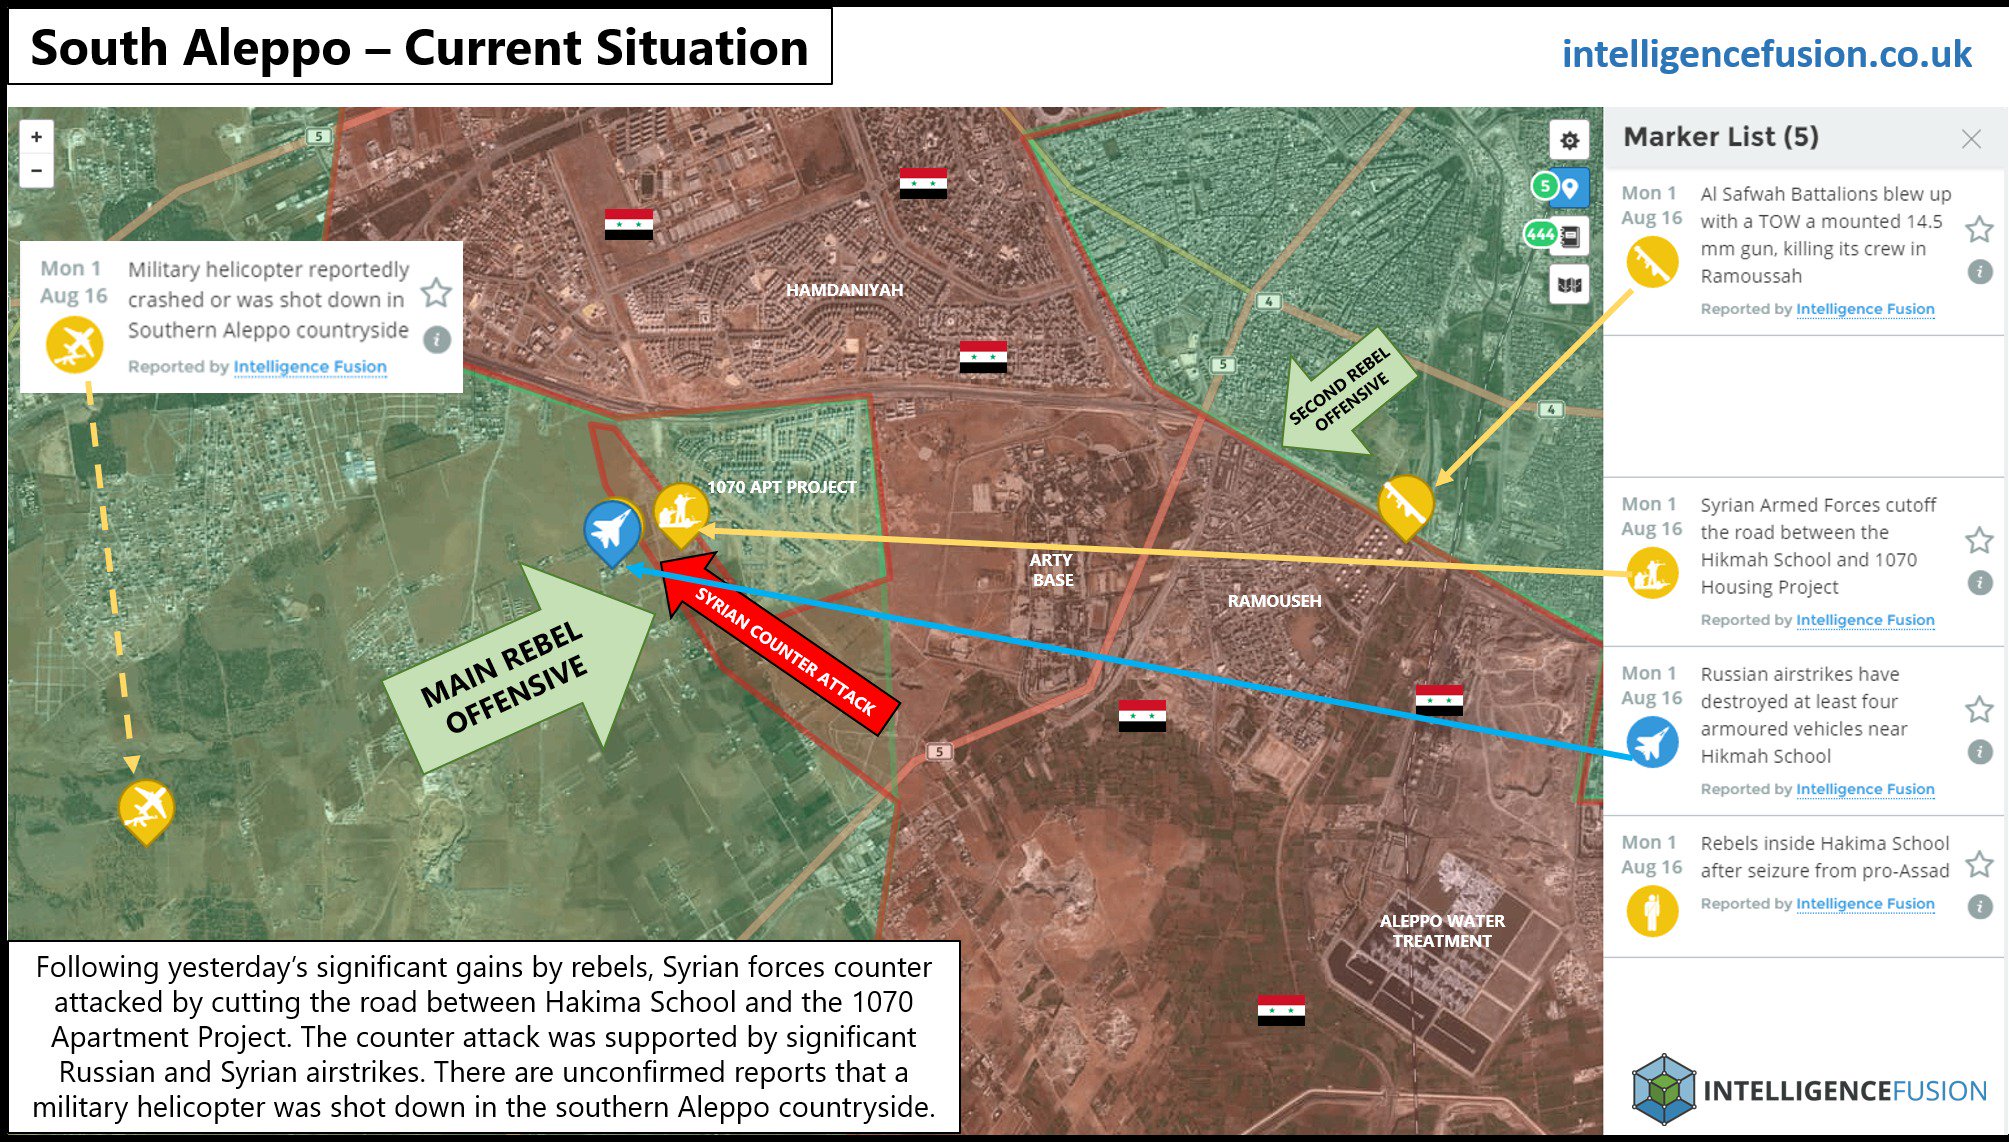 Russian Aerospace Forces Pulverize Area of Downed MI-8, Syrian Army Counter-Attacks in South Aleppo